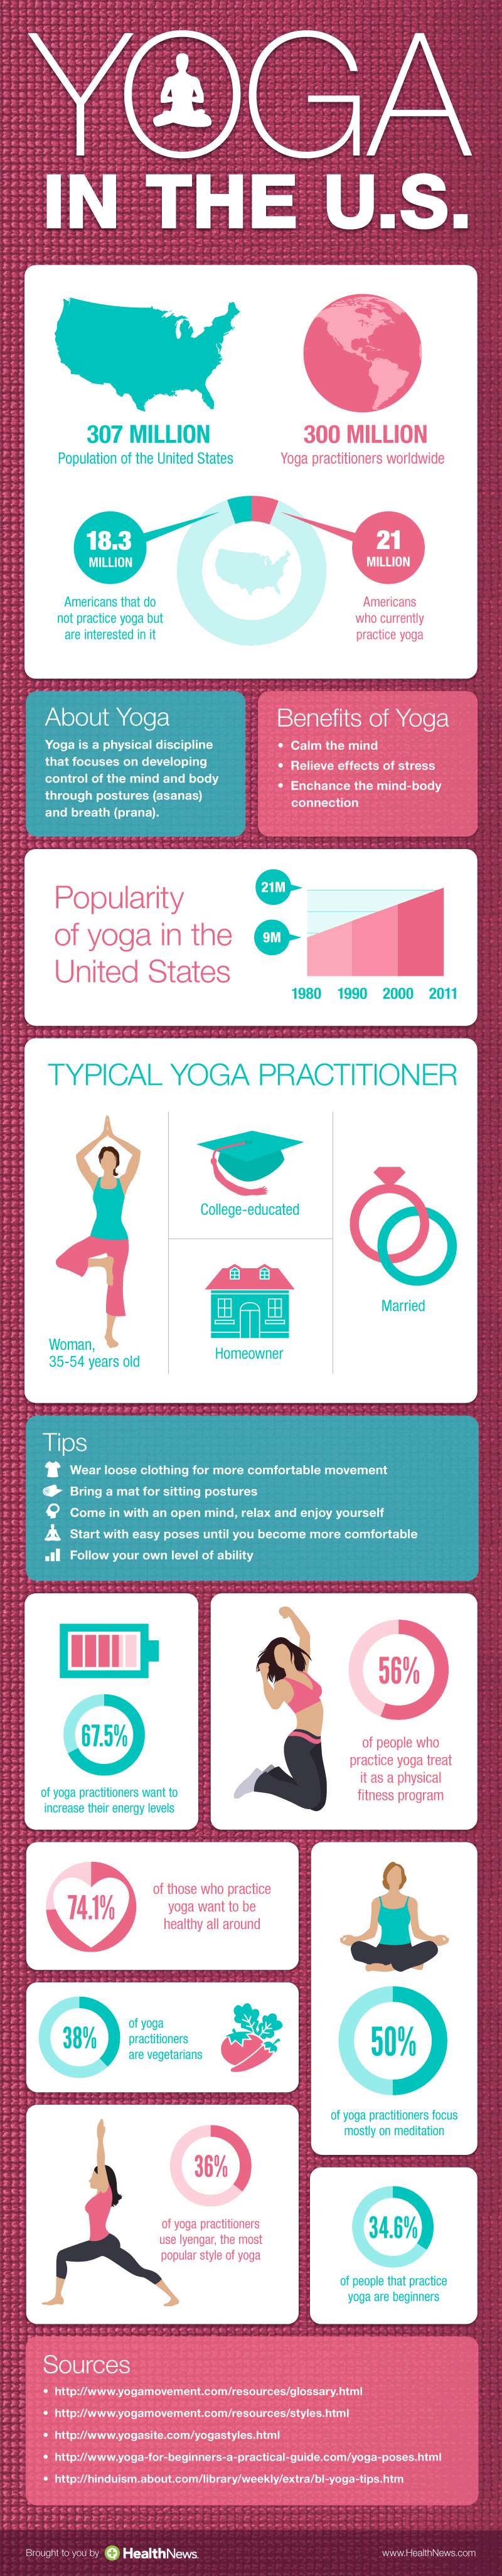 Facts About Yoga in the United States